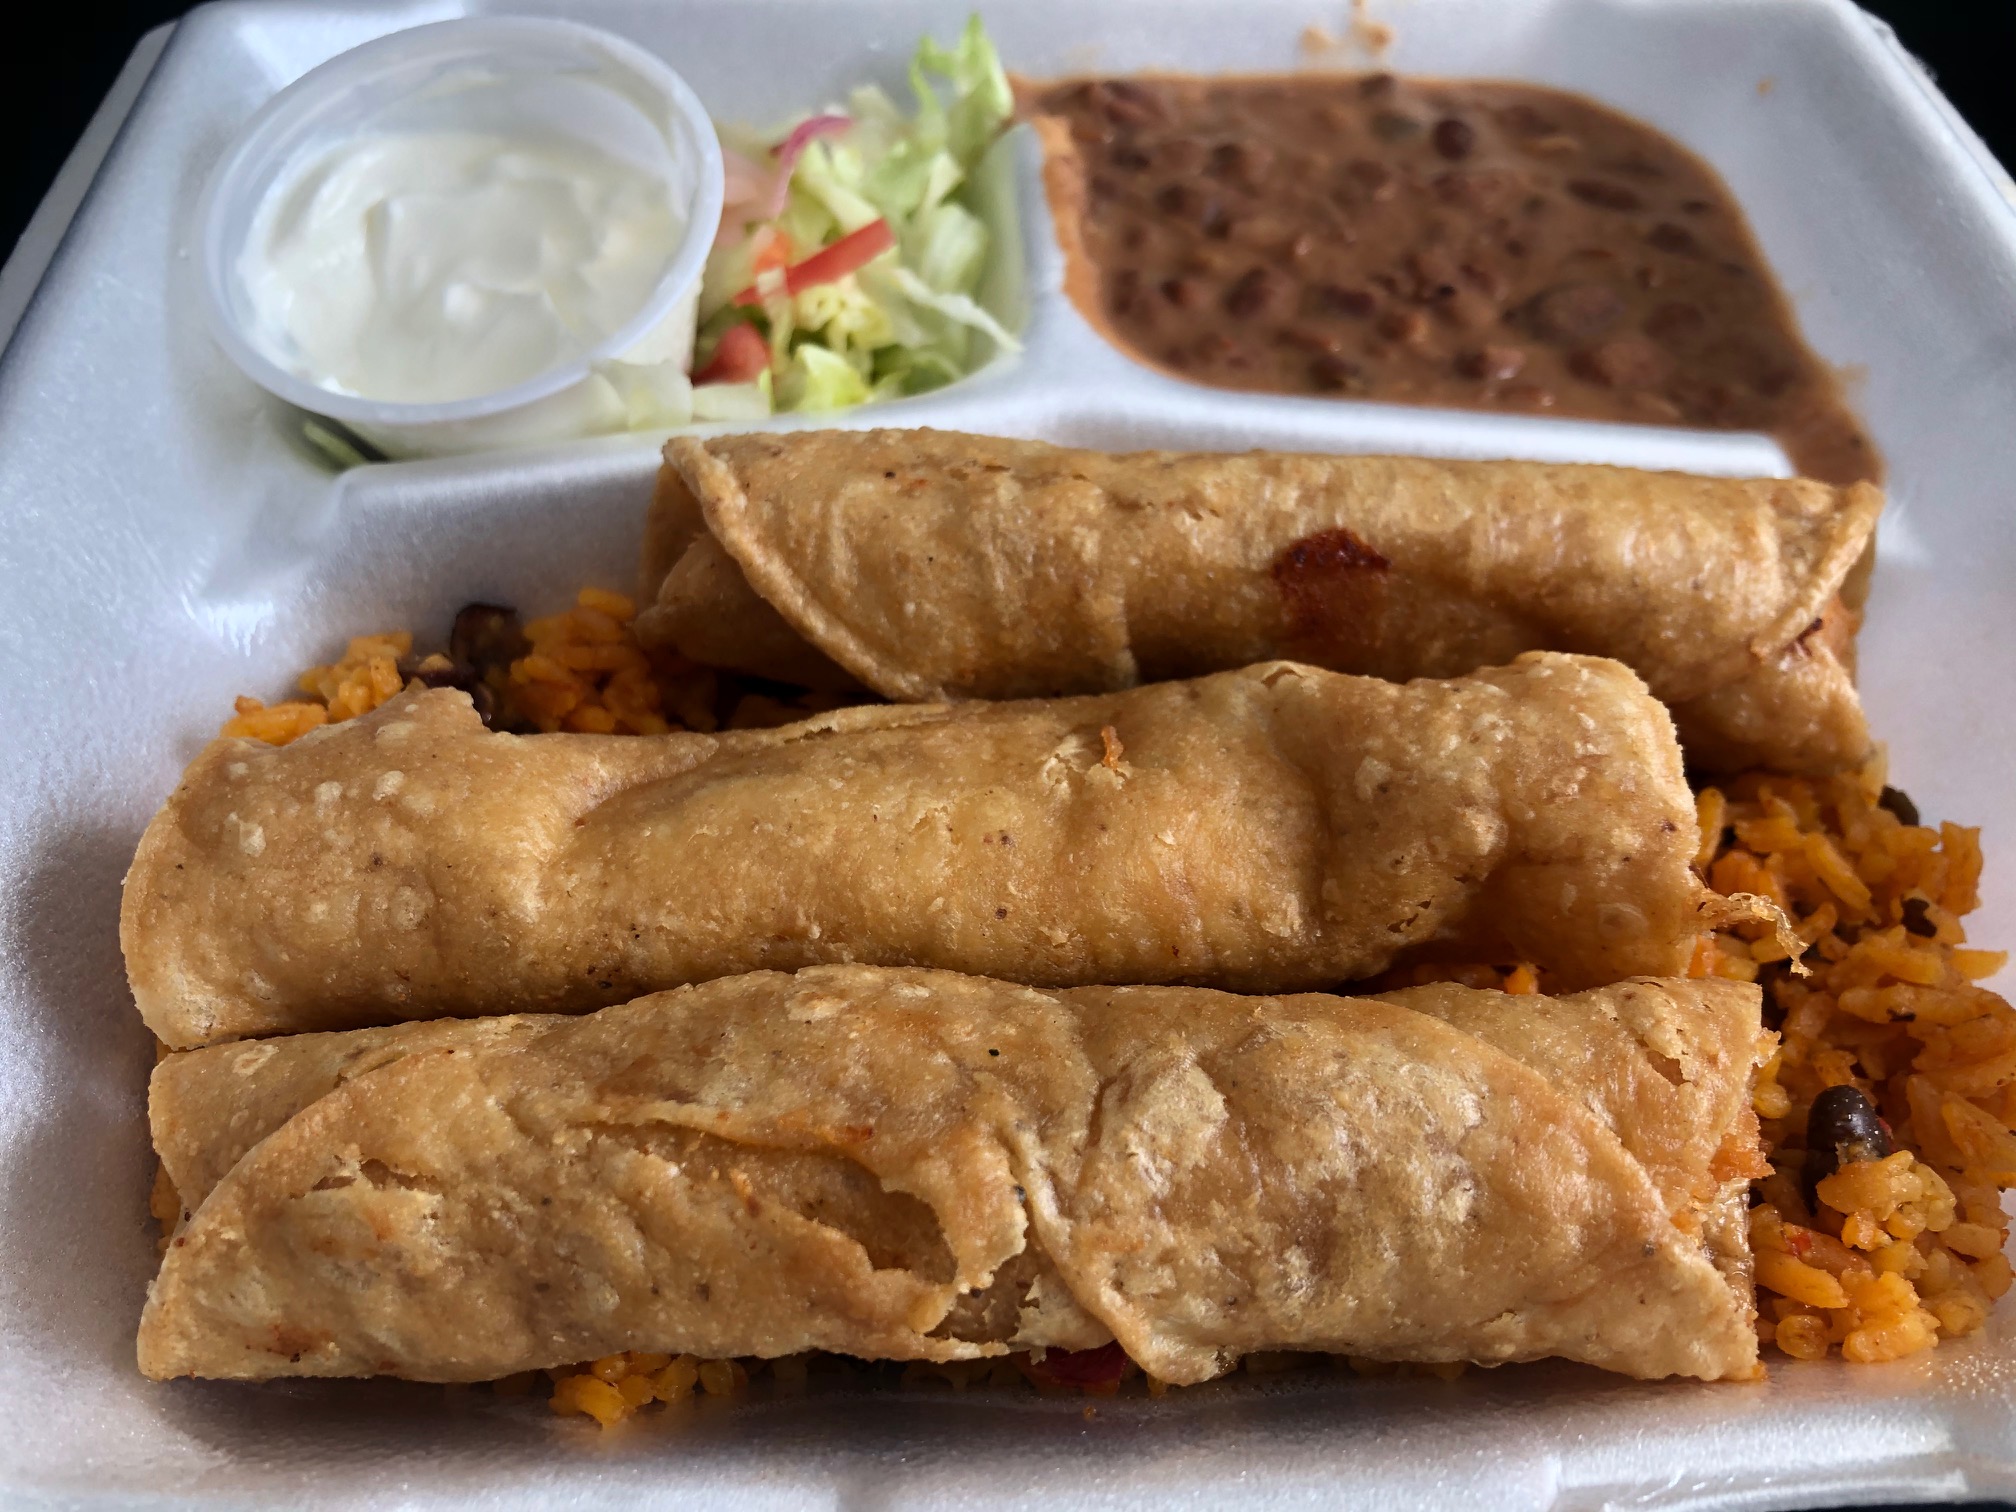 In a styrofoam container, there are three flautas atop rice with two dividers in the background with sour cream and lettuce on the left and beans on the right. Photo by Alyssa Buckley.